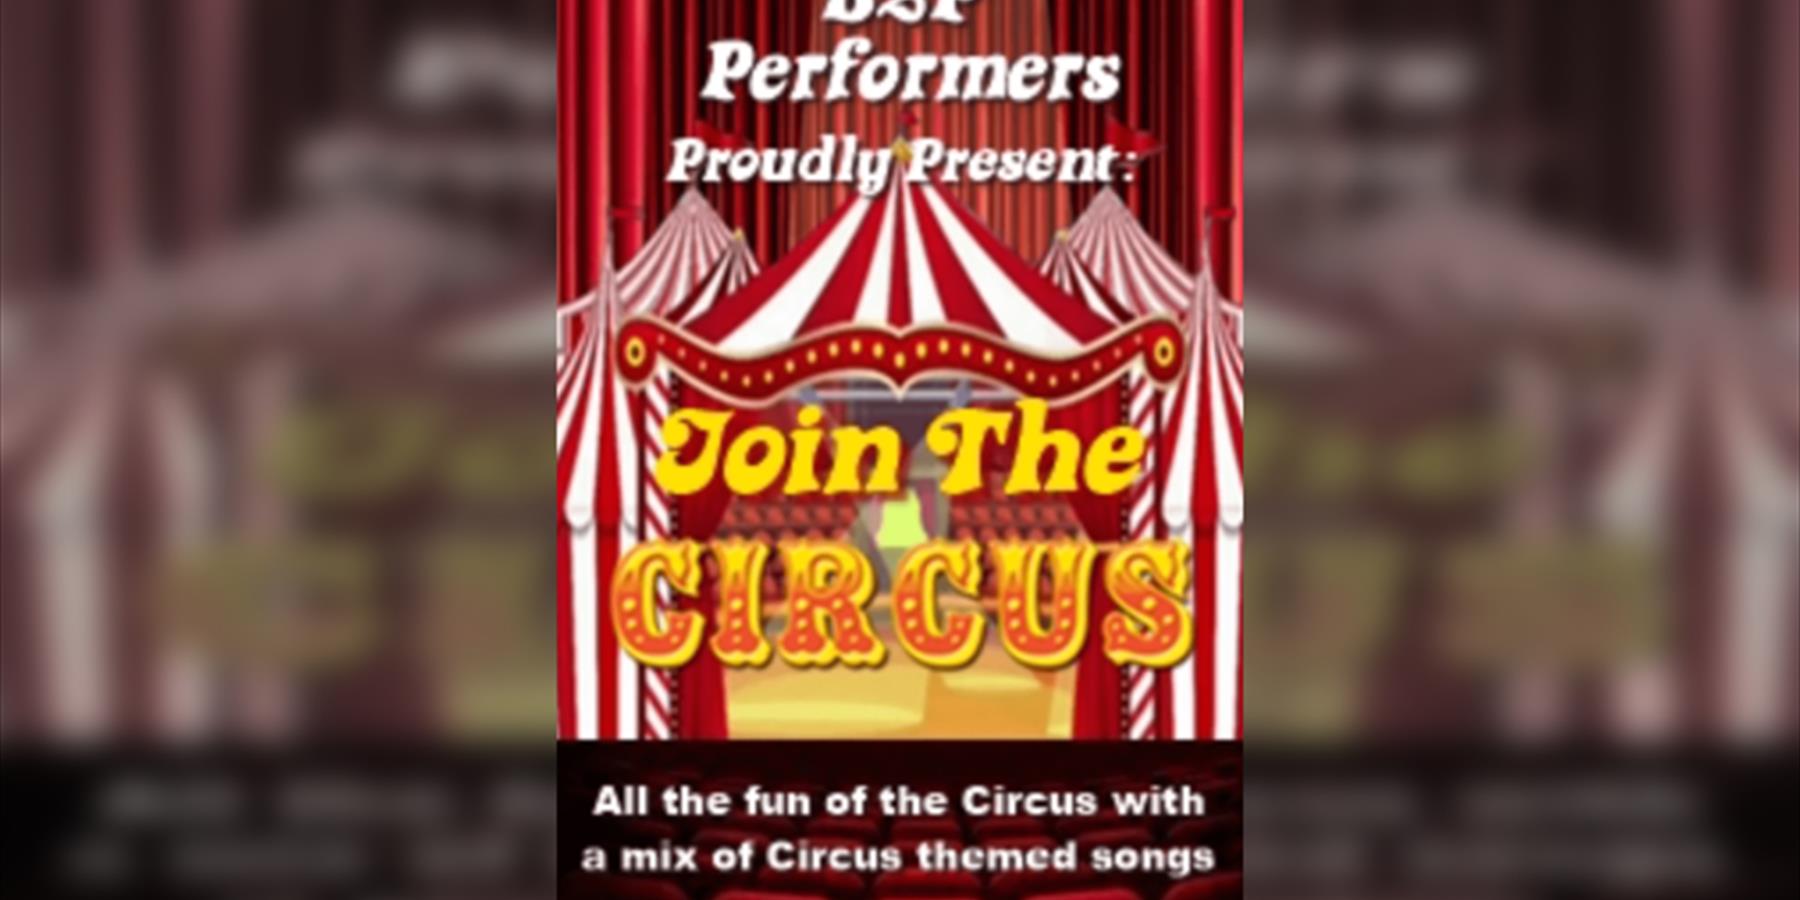 B2P Performers Present: Join The Circus